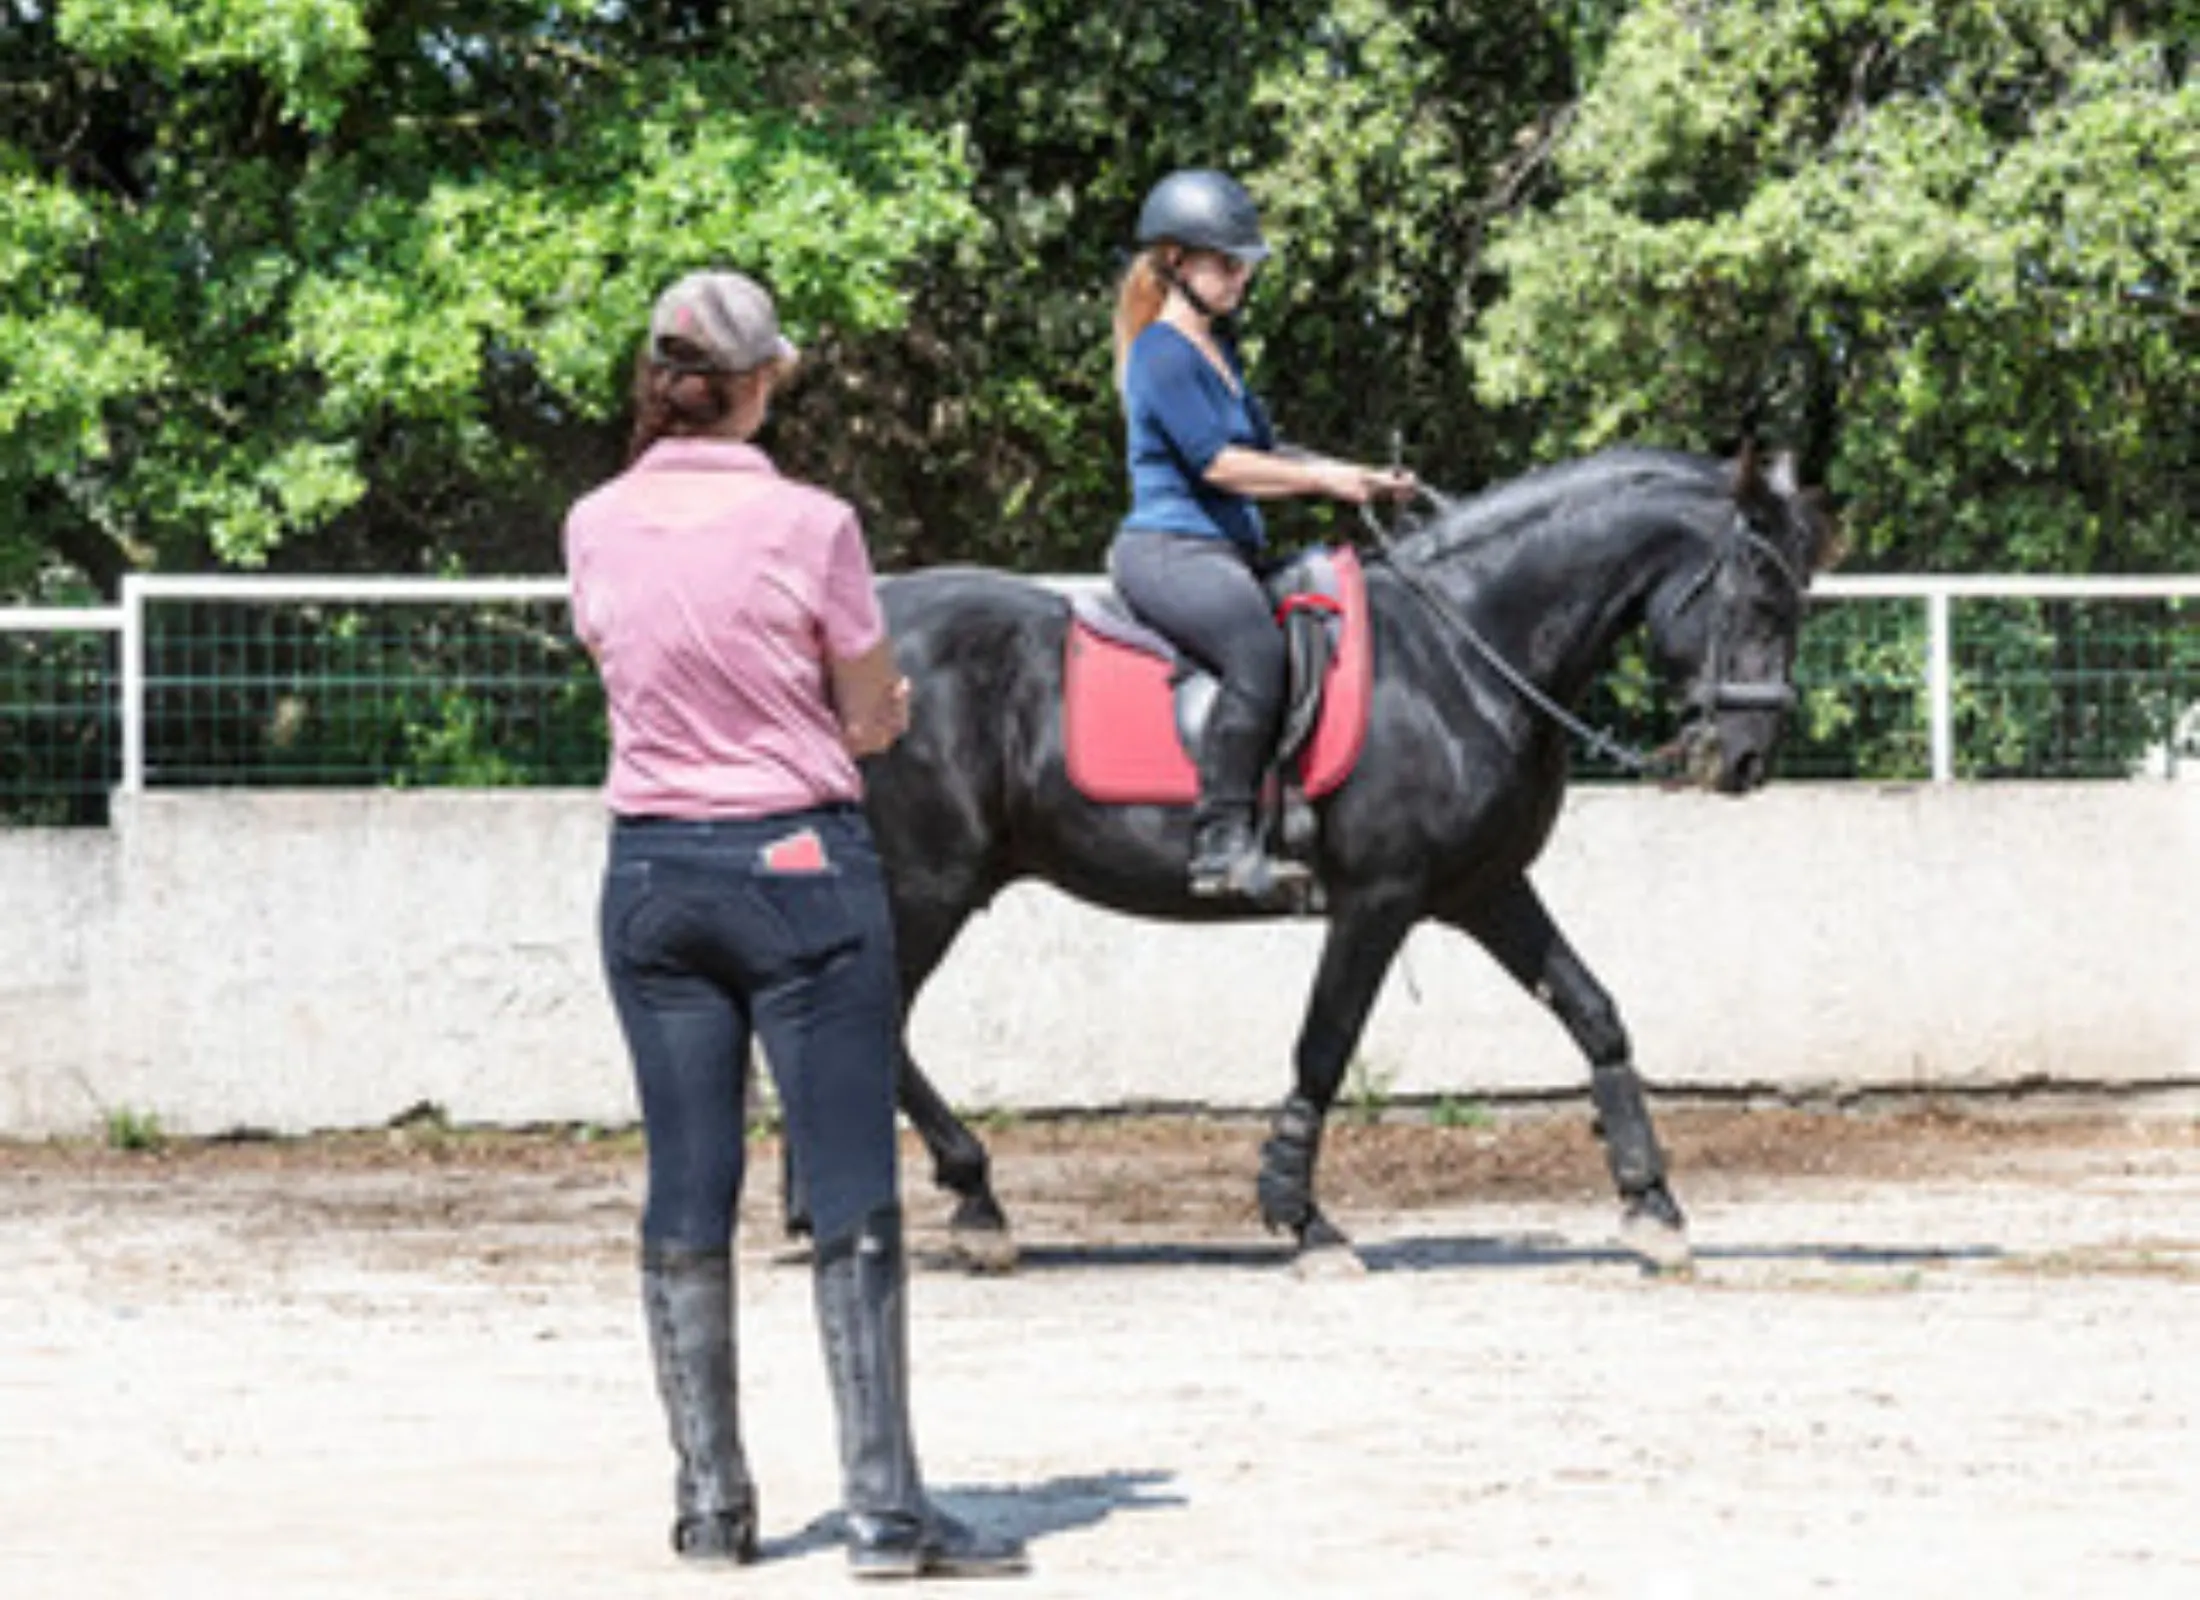 Photo of a child on a horse in a horseback riding lesson.